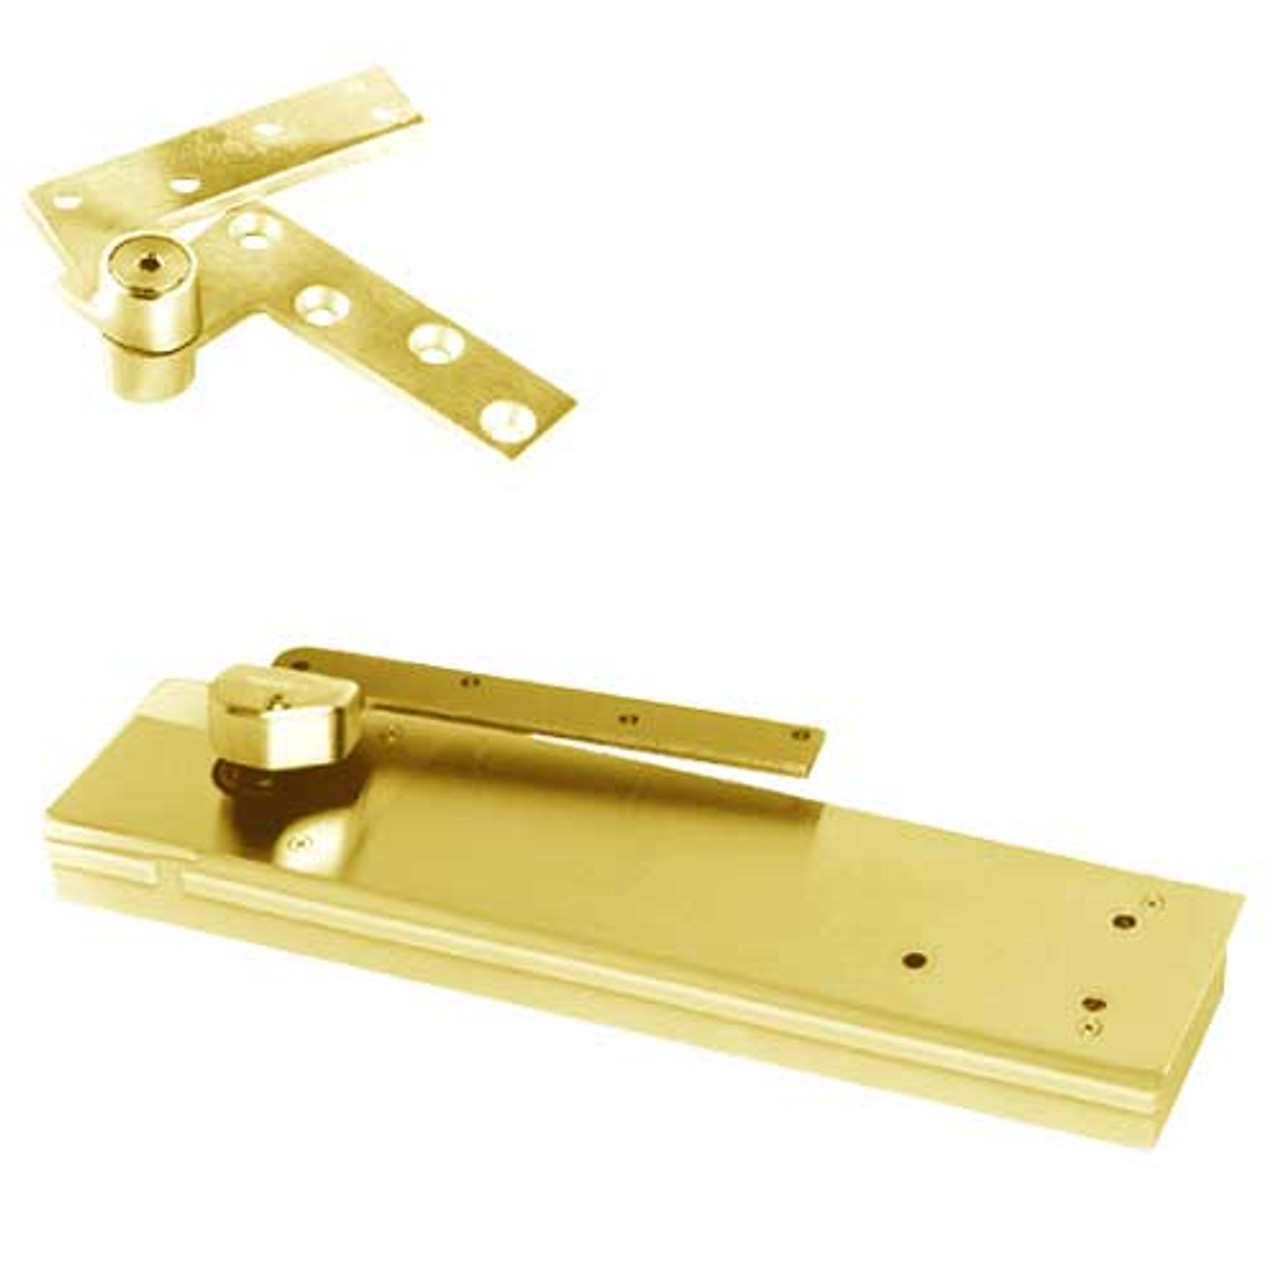 5103ABC105-1-1/2OS-LFP-LCC-LH-605 Rixson 51 Series 1-1/2" Offset Hung Shallow Depth Floor Closers in Bright Brass Finish